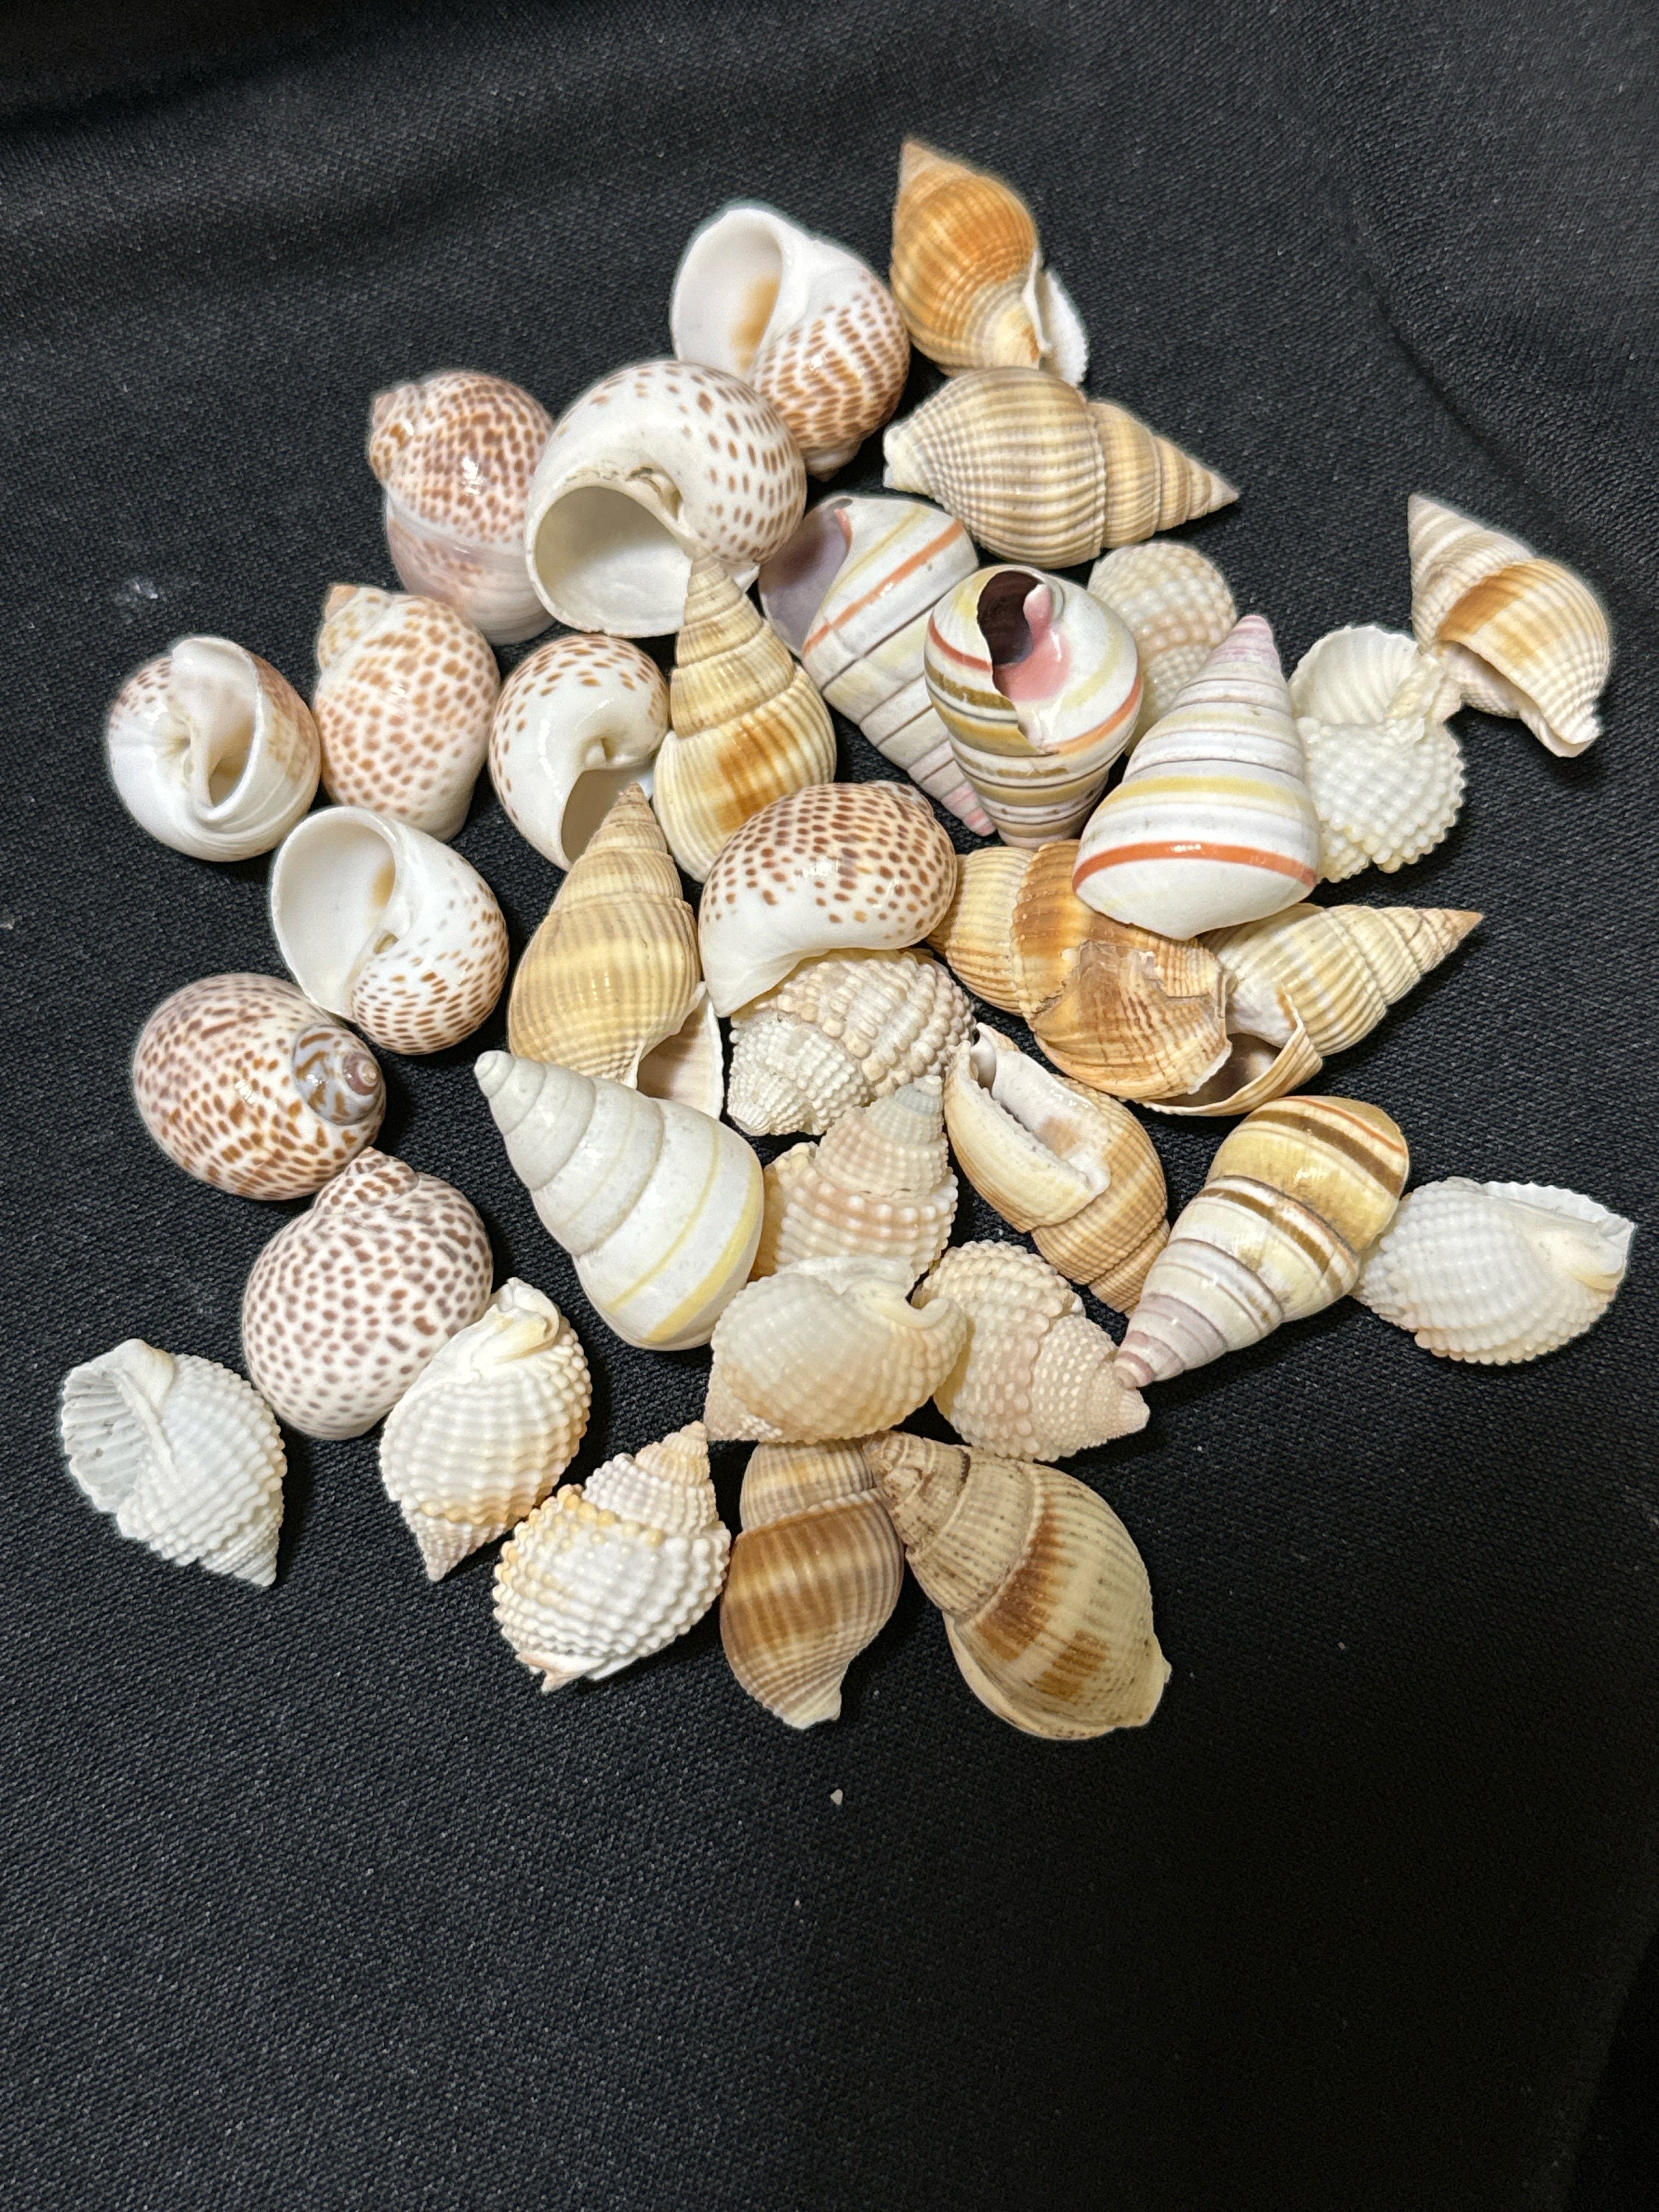 10-30mm Natural Spiral Shell Beads, Drilled Seashells, Sea Shells, Nautical  Style, Summer Jewelry Making, Tropical Theme, 10-30x14-18x5-6mm